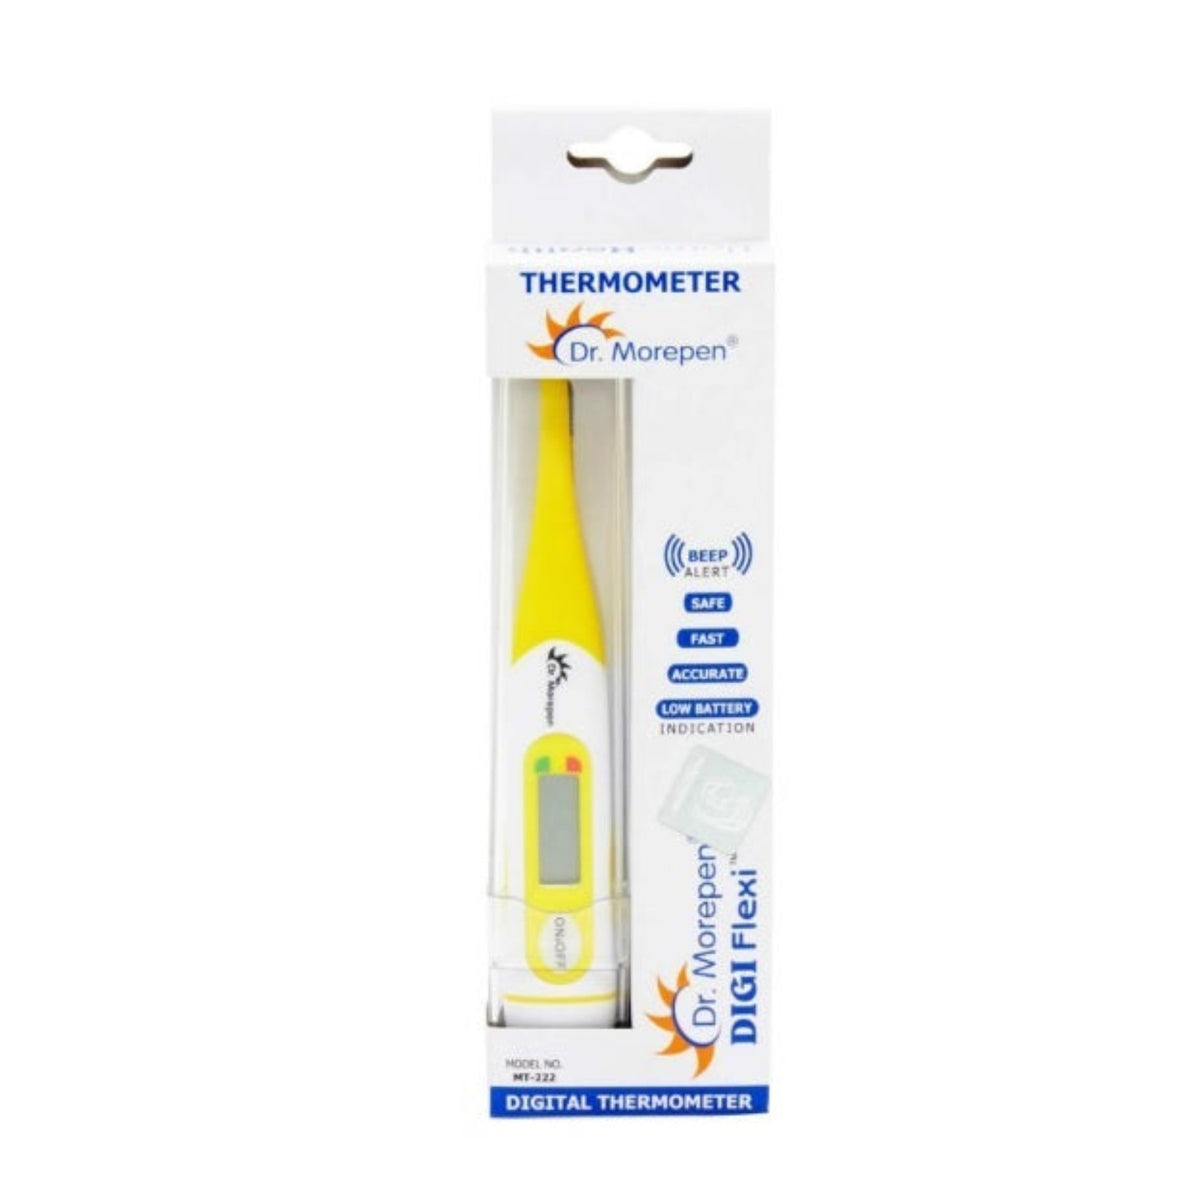 Dr. Morepen MT-222 Digitales Thermometer (mehrfarbig)